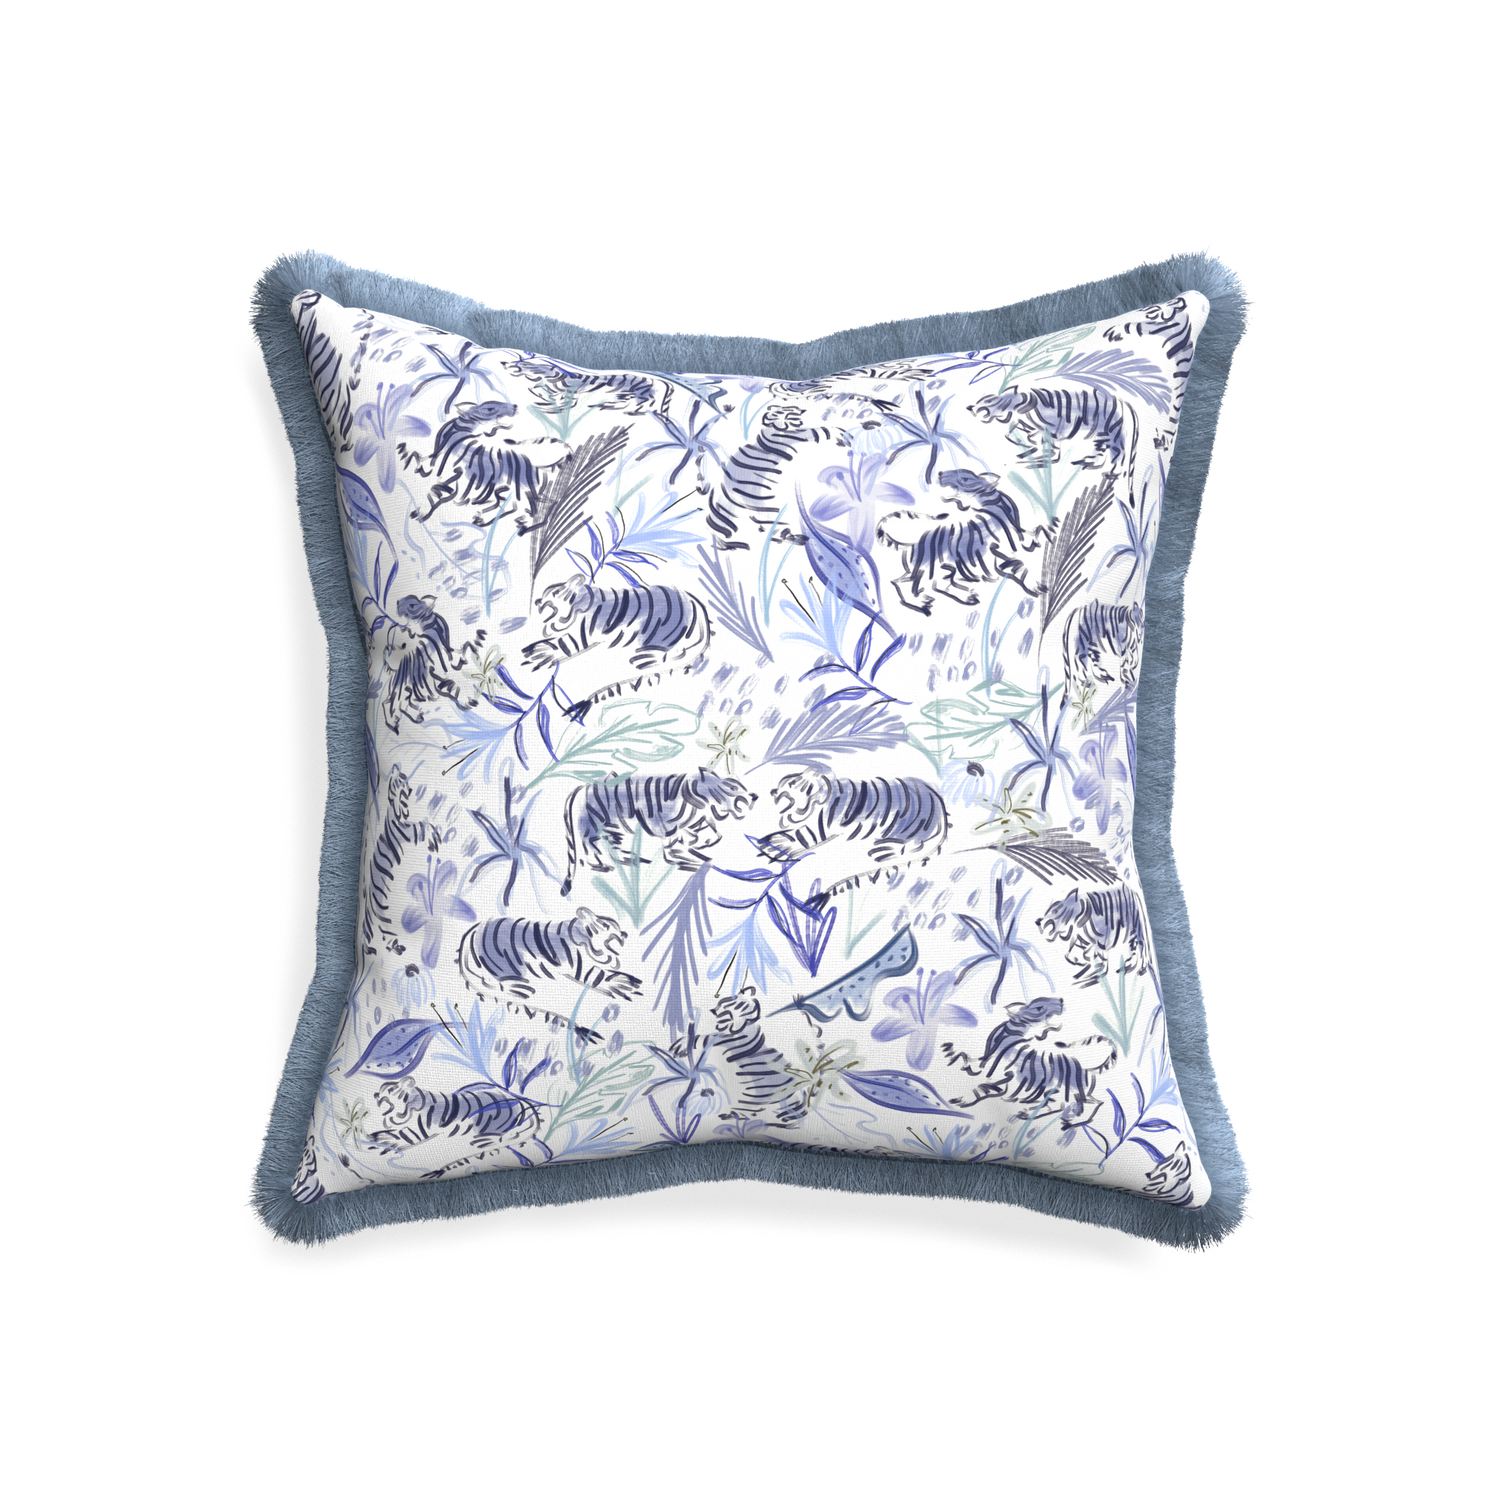 20-square frida blue custom blue with intricate tiger designpillow with sky fringe on white background